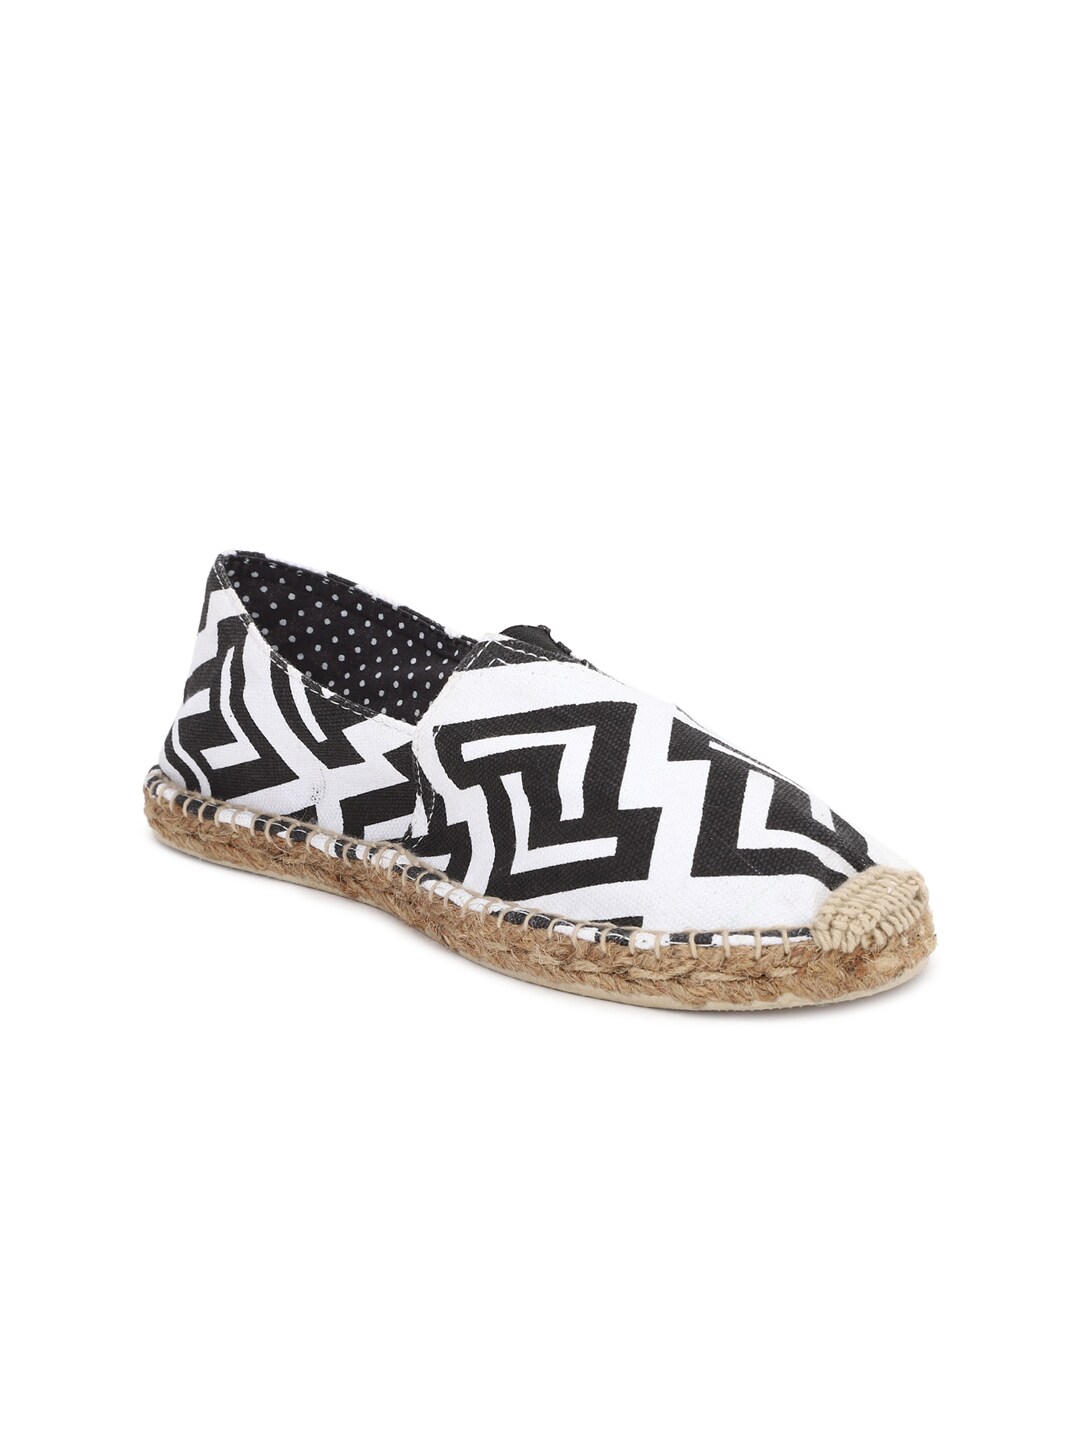 FOREVER 21 Women White Printed Espadrilles Price in India